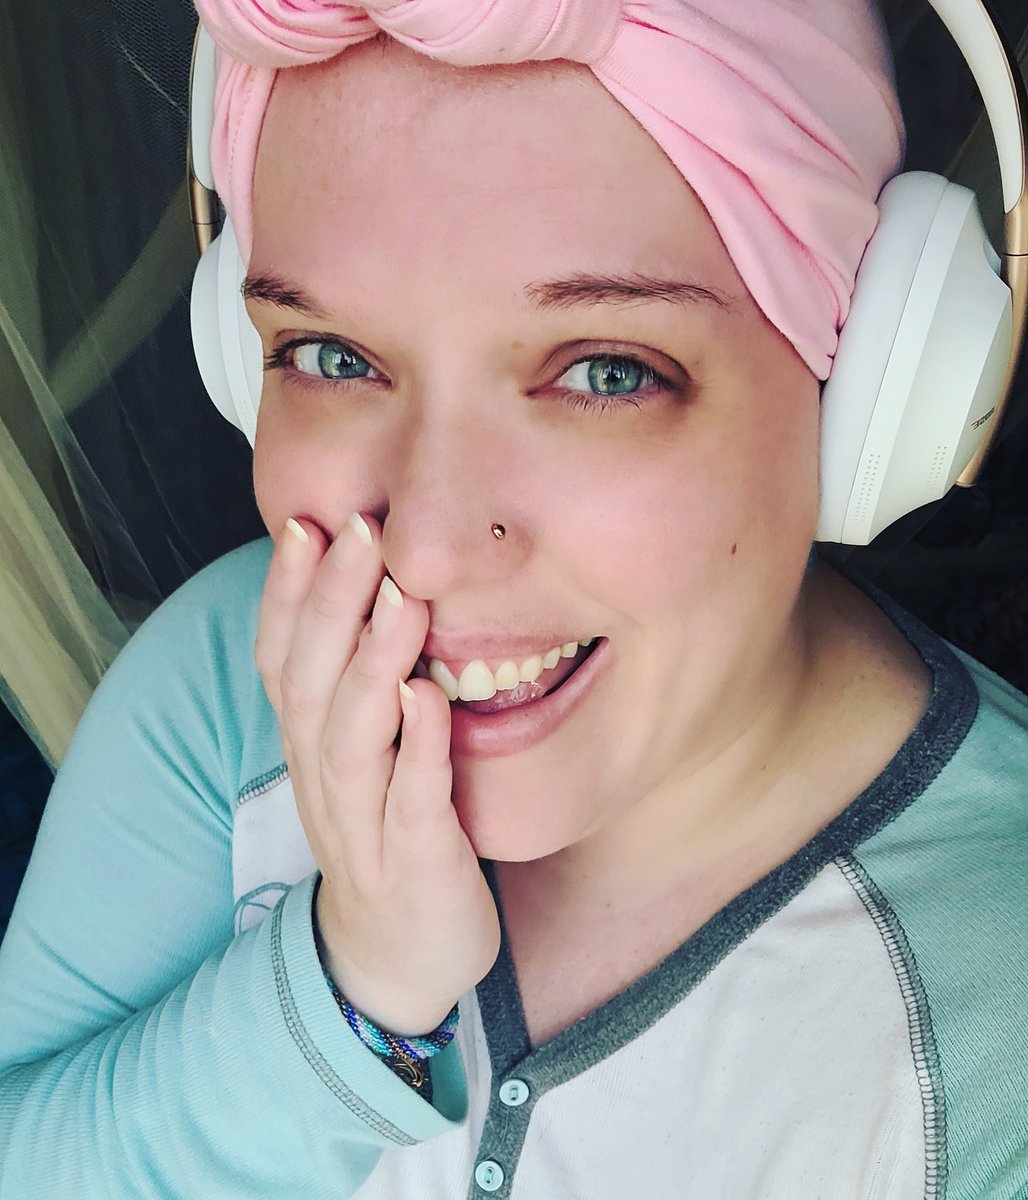 Thanks to the generosity of @Bose, I now have a fantastic pair of headphones! 🎧

Please read my story here ⤵️
hannahcrazyhawk.com/post/_bose

#TeamBose #boseheadphones #ActuallyAutistic #AutismAwareness #peace #GivingTuesday2020 
#chemotherapy #nomakeup